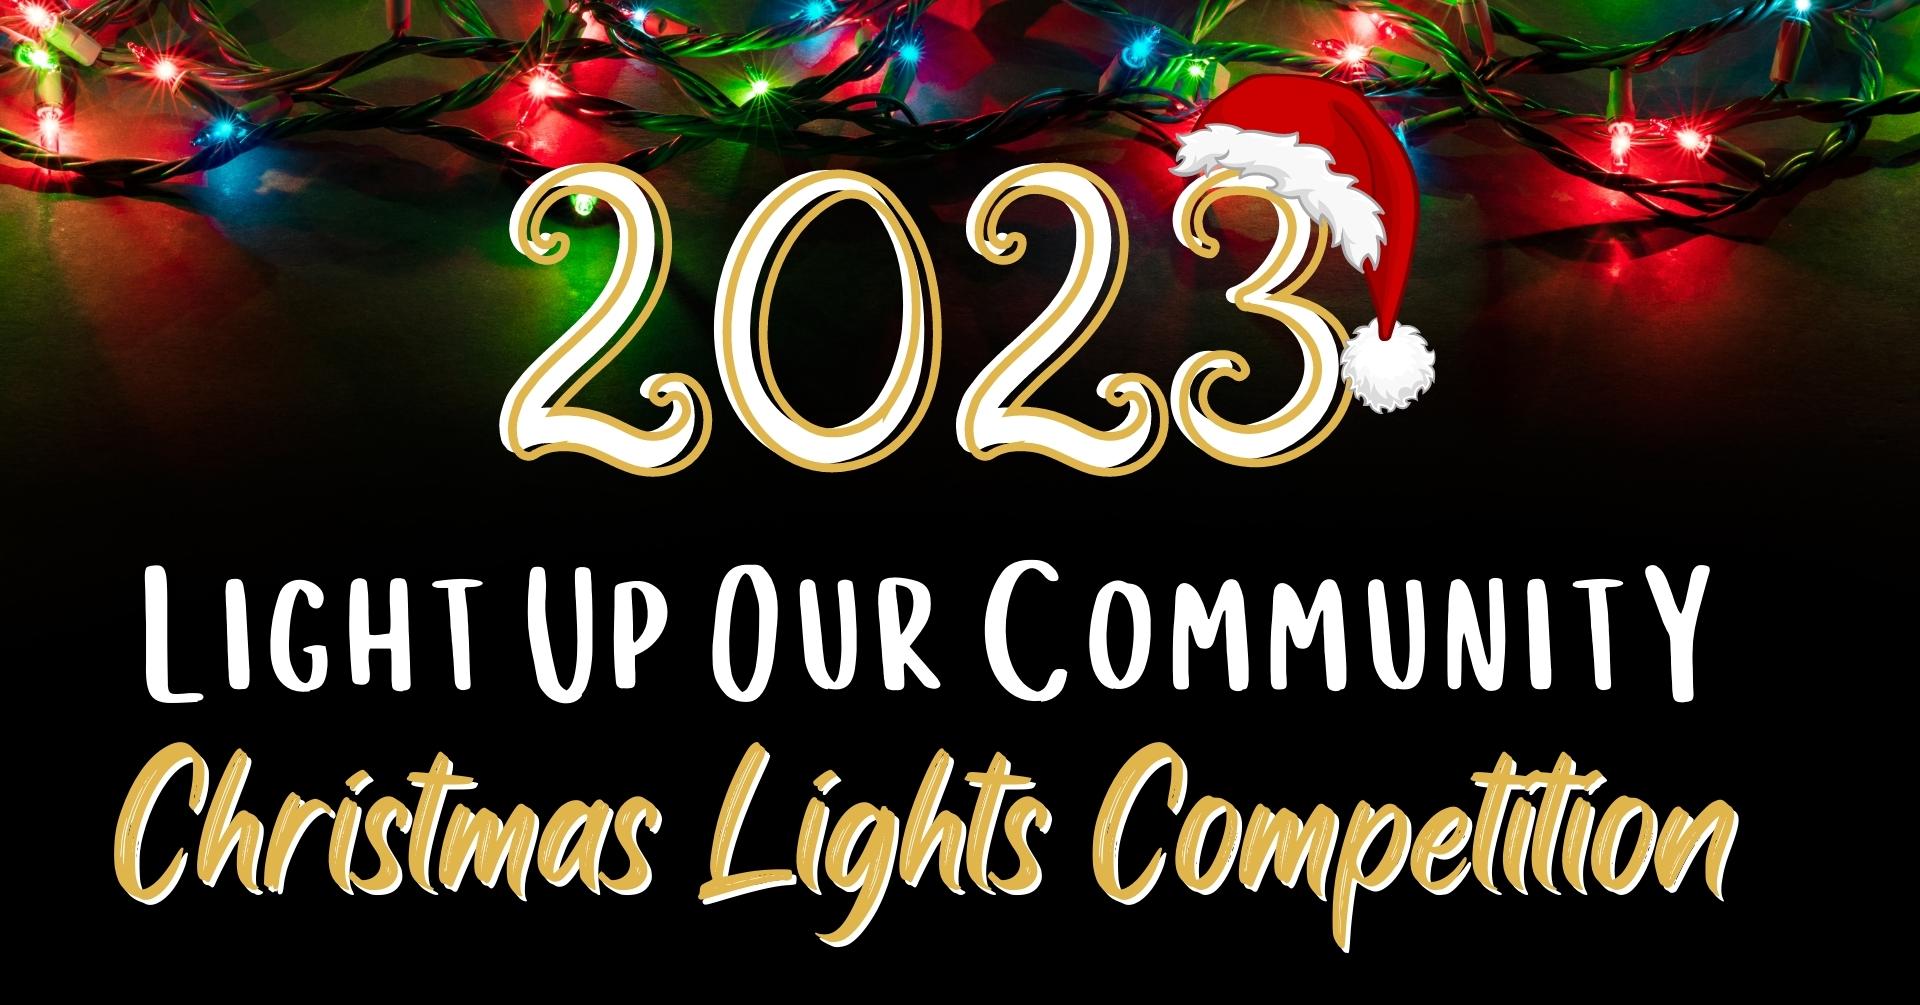 Light Up Our Community Christmas Lights Competition